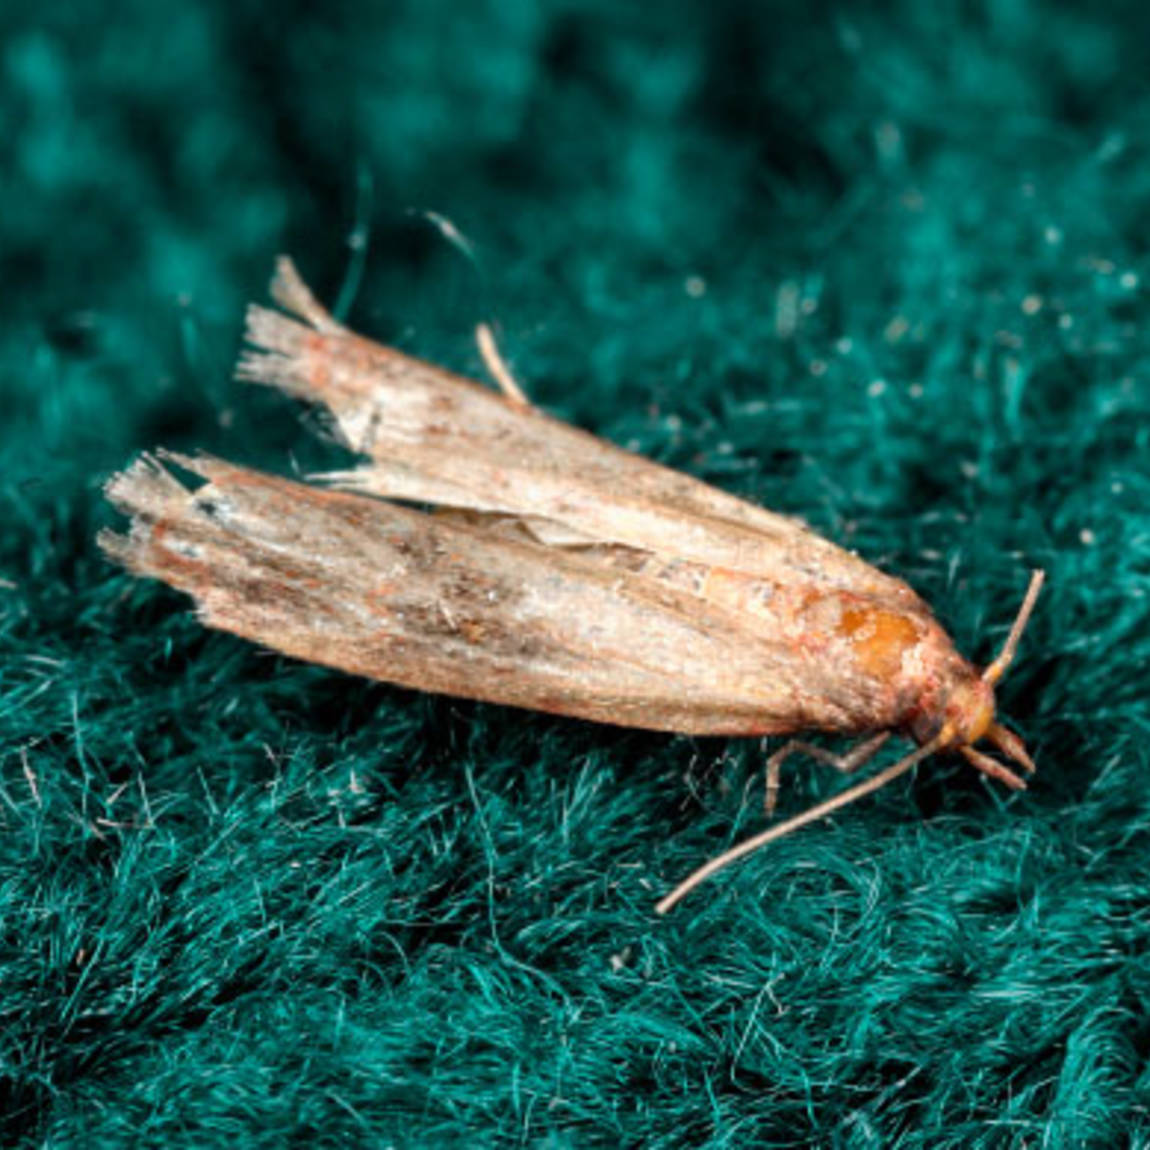 Pest advice for controlling Moths